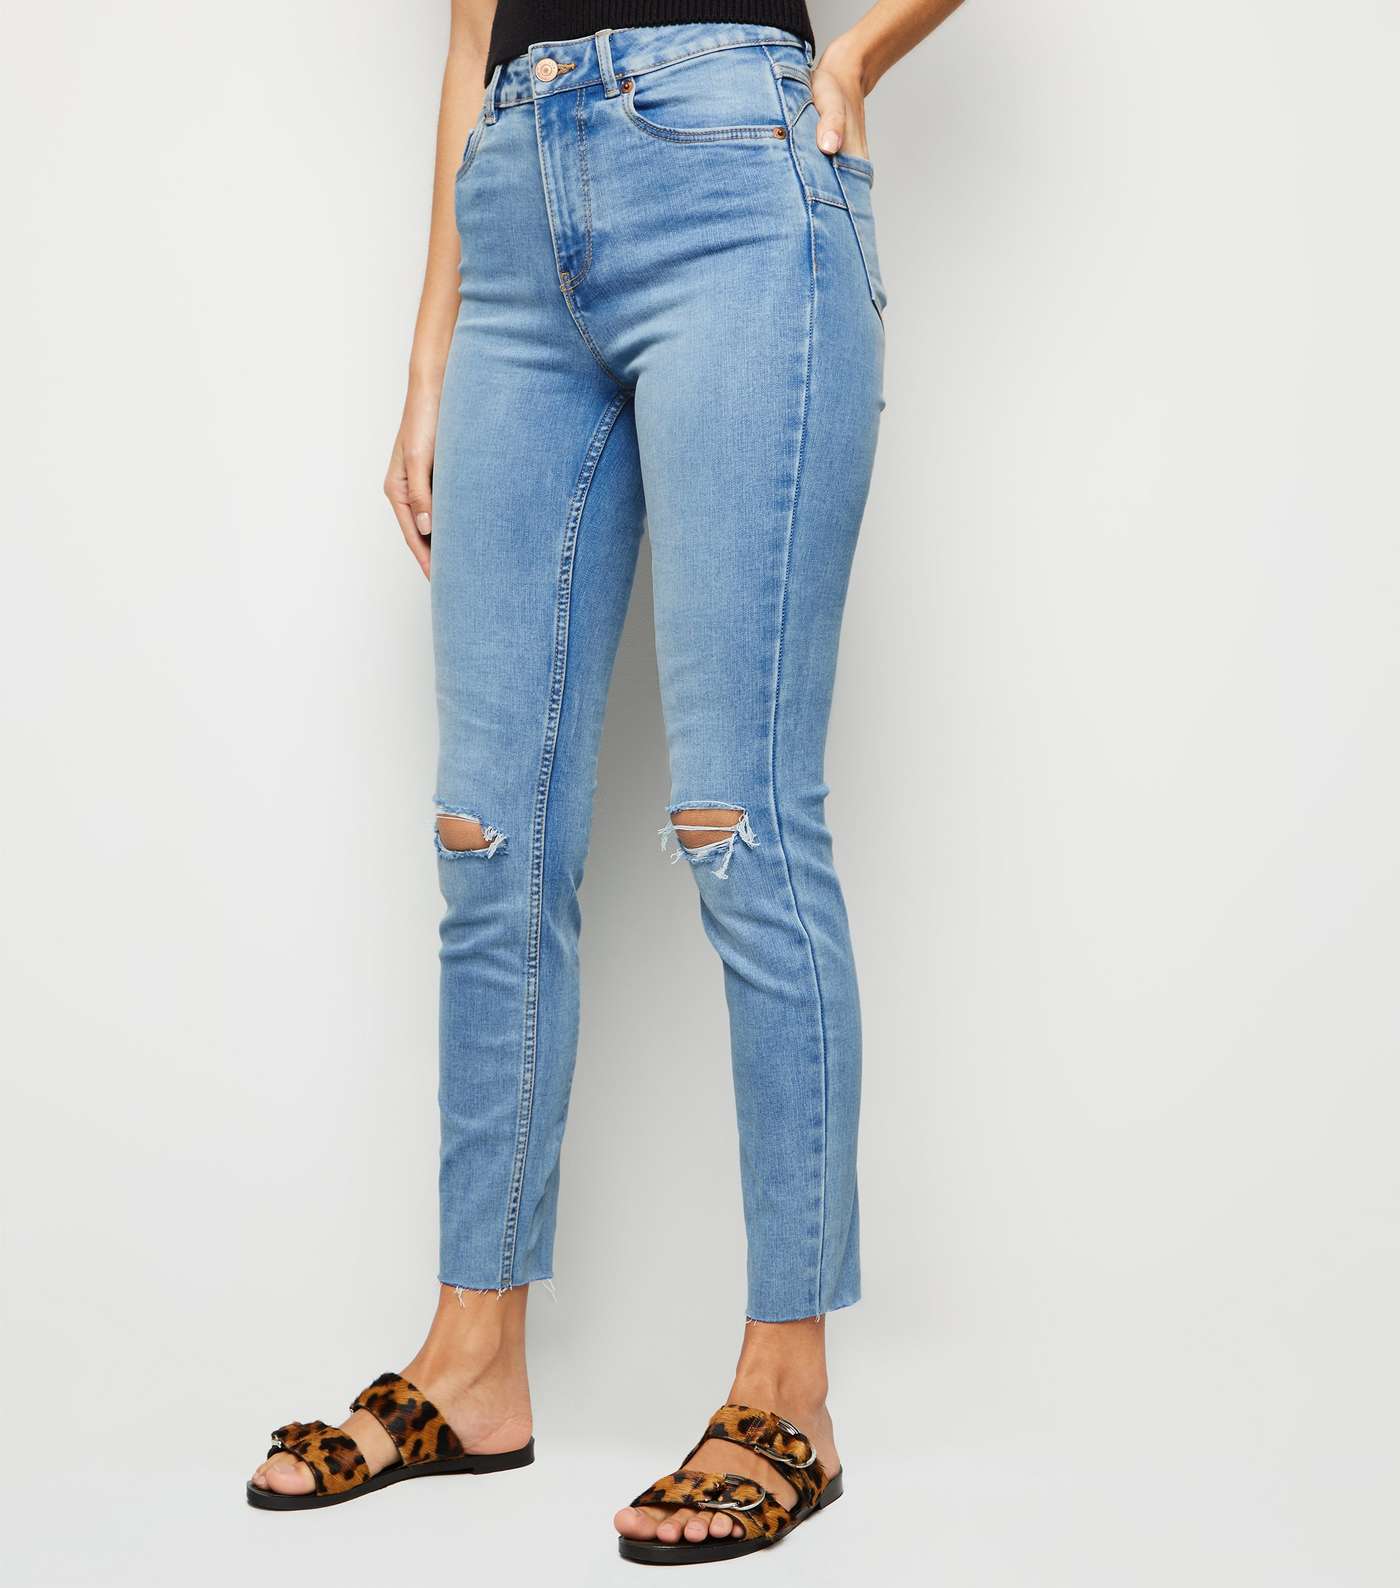 Pale Blue 'Lift & Shape' Ripped Skinny Jeans Image 2